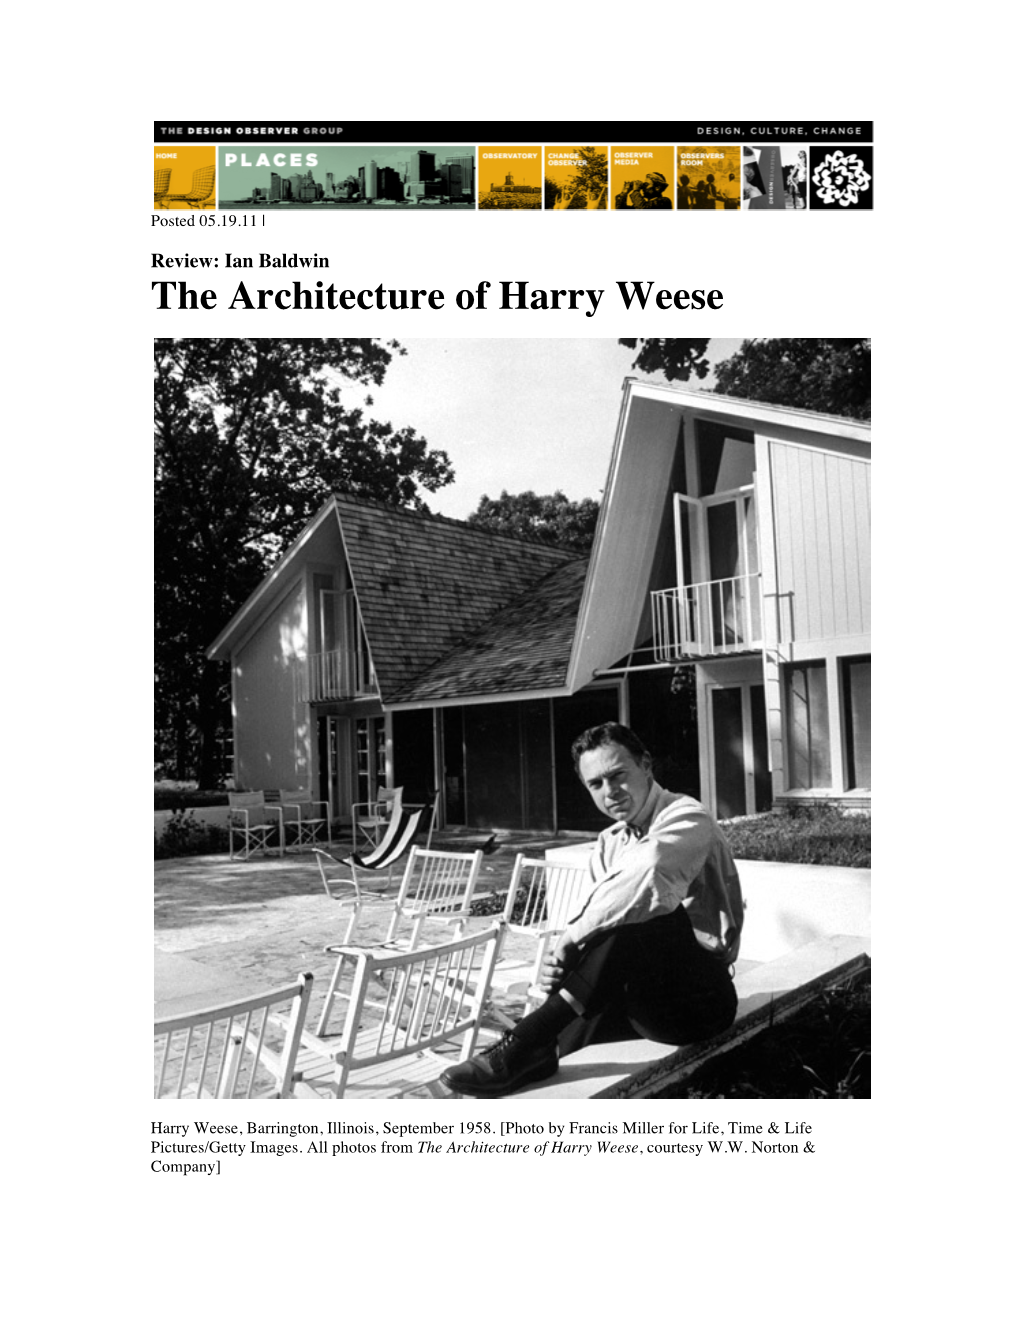 The Architecture of Harry Weese